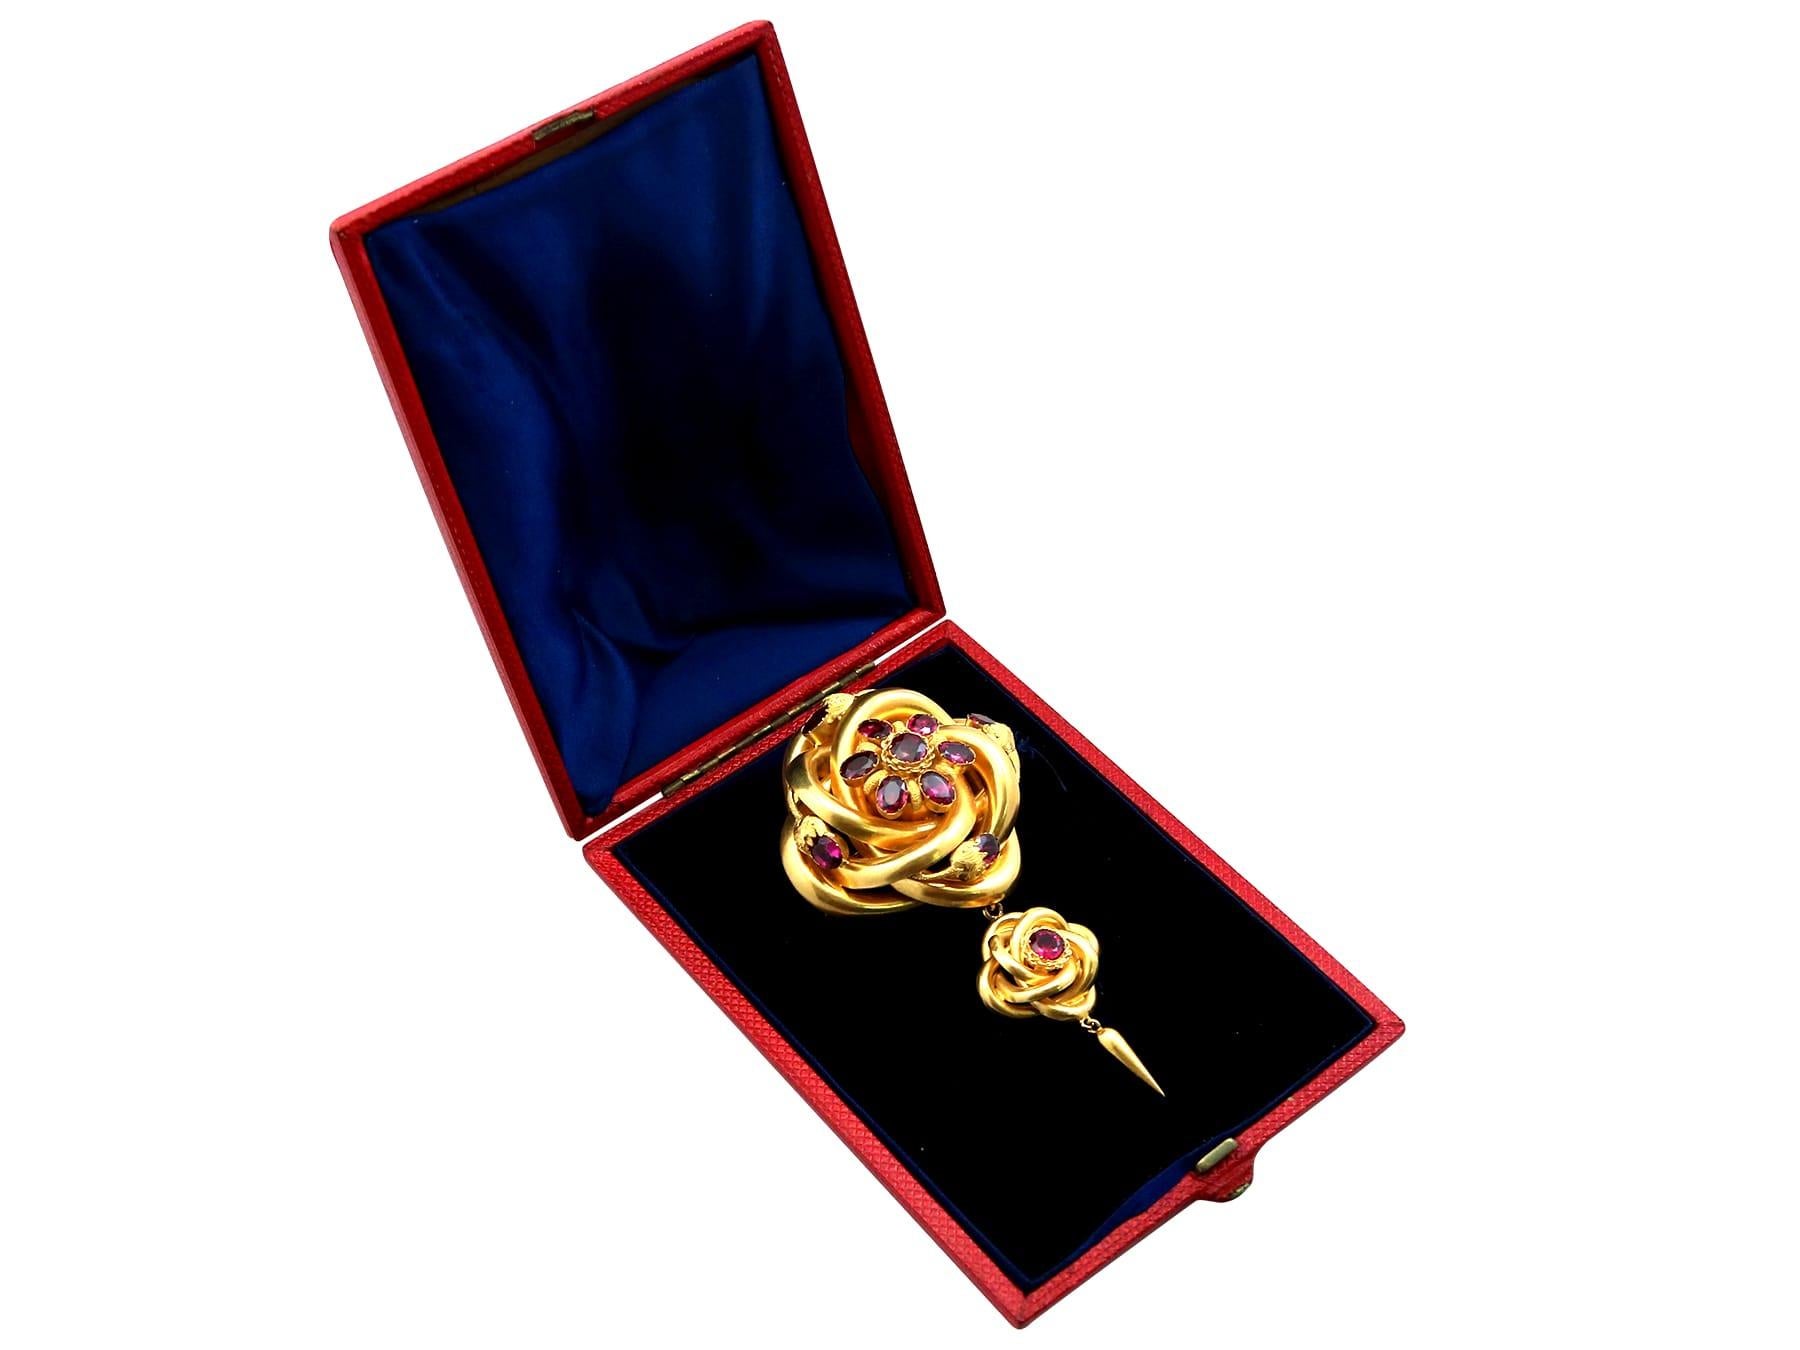 Antique 9.48 Carat Garnet and 21k Yellow Gold Brooch/Pendant For Sale 3